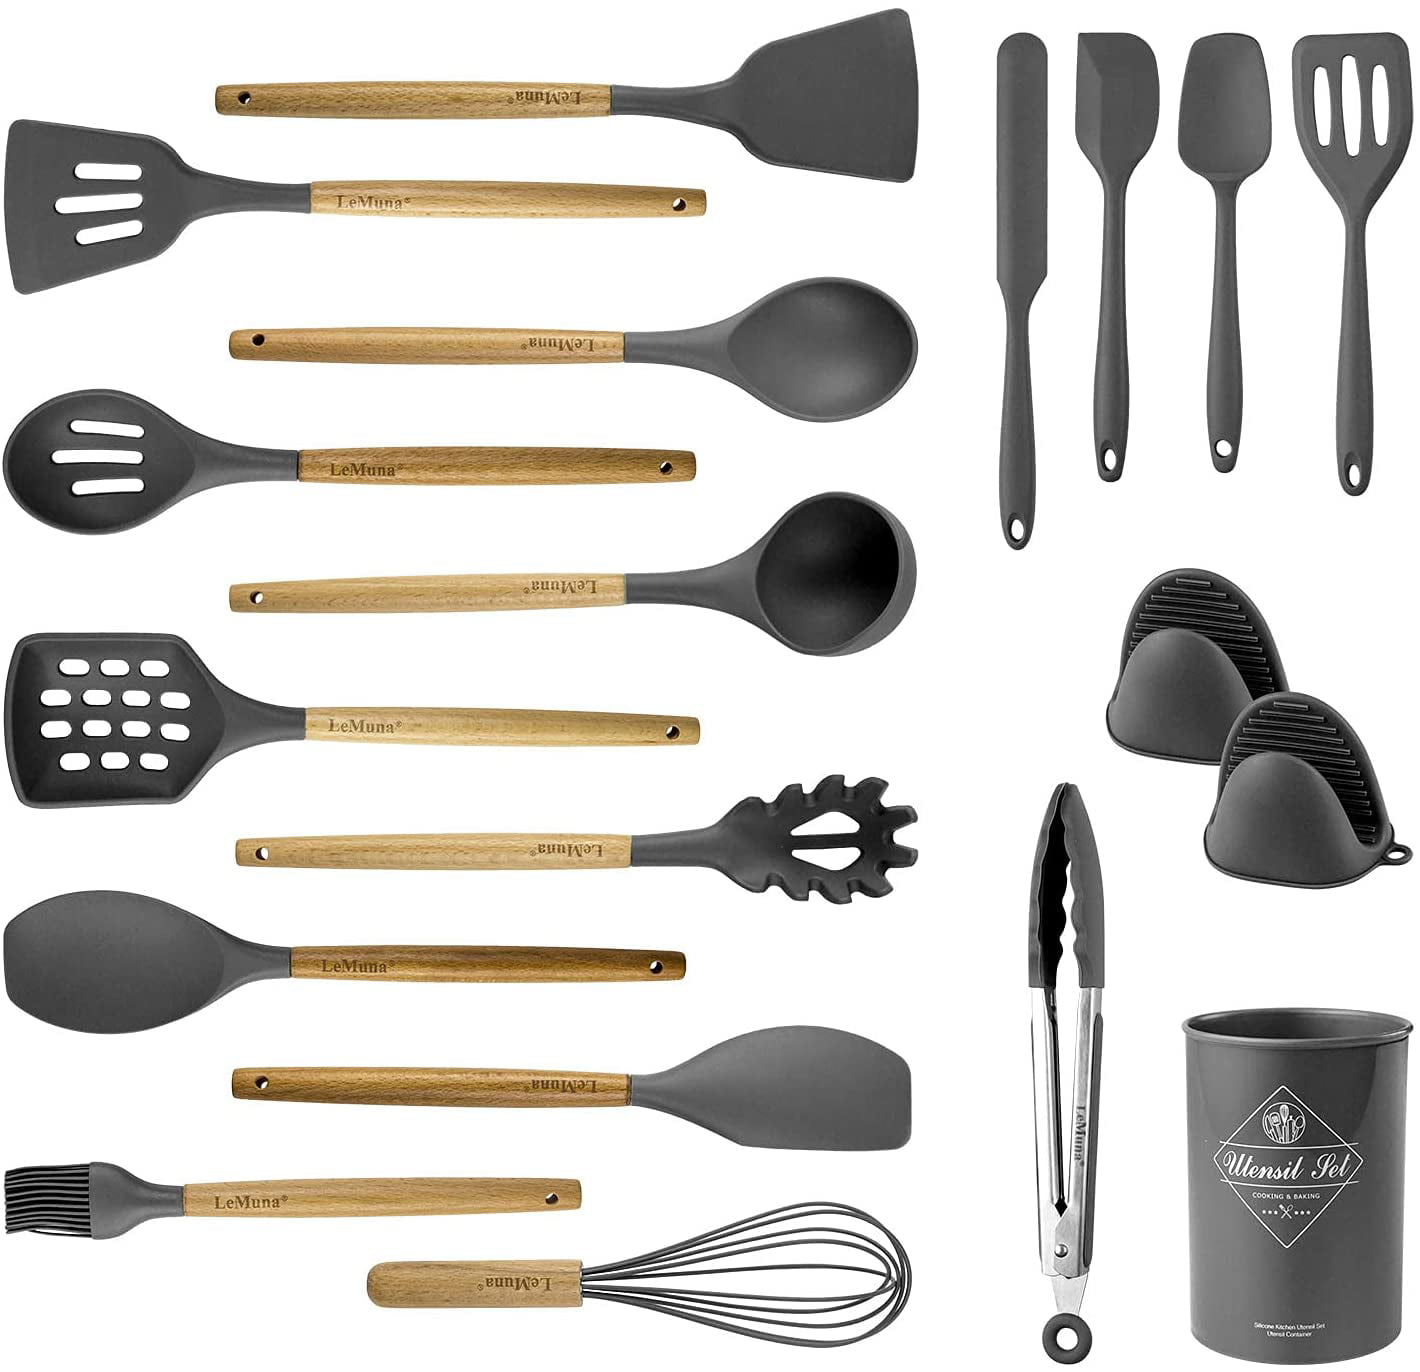 13 Pieces Heat-Resistant Suit High-Grade Wooden Handle, TLYCWC Silicone Kitchenware Gray Kitchen Utensil Non-Stick Pan, 